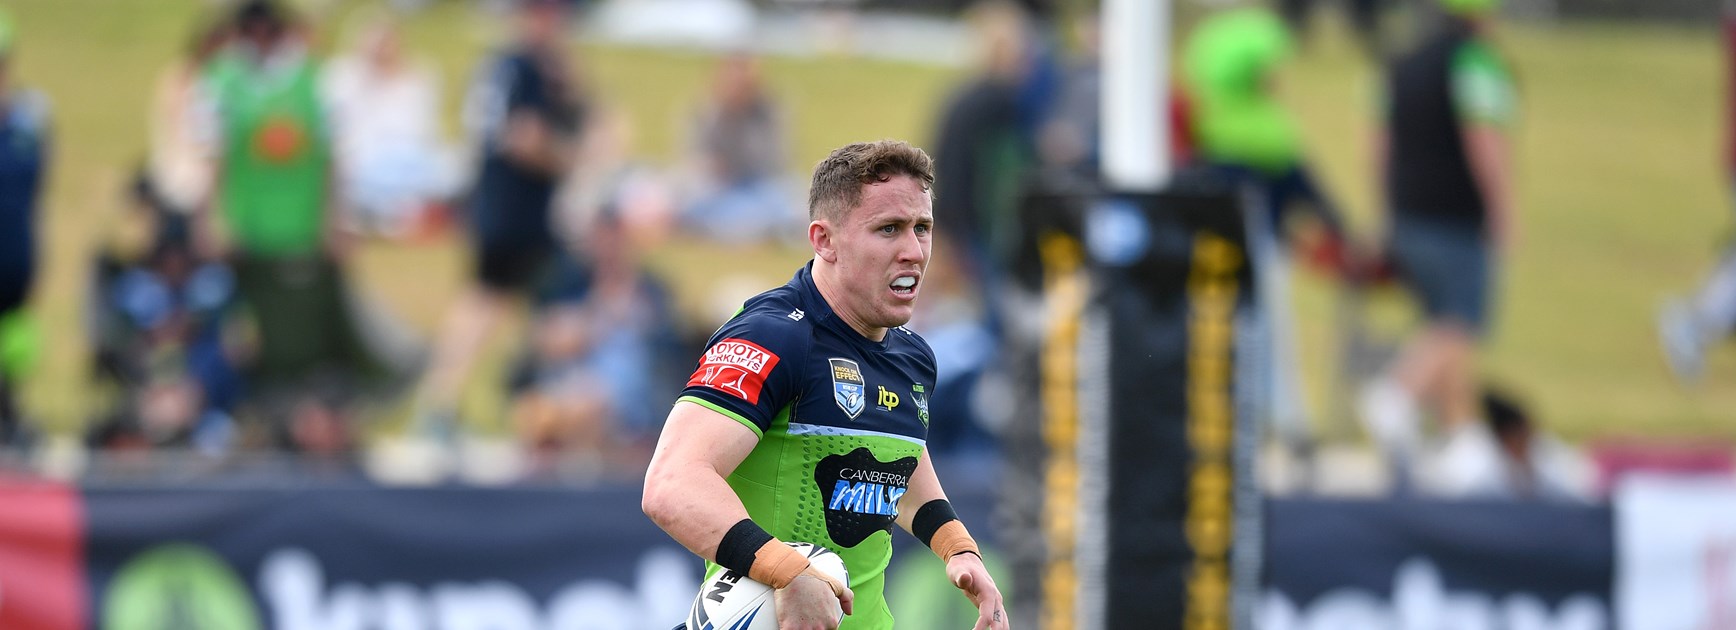 NSW Cup Preview: Raiders v Magpies